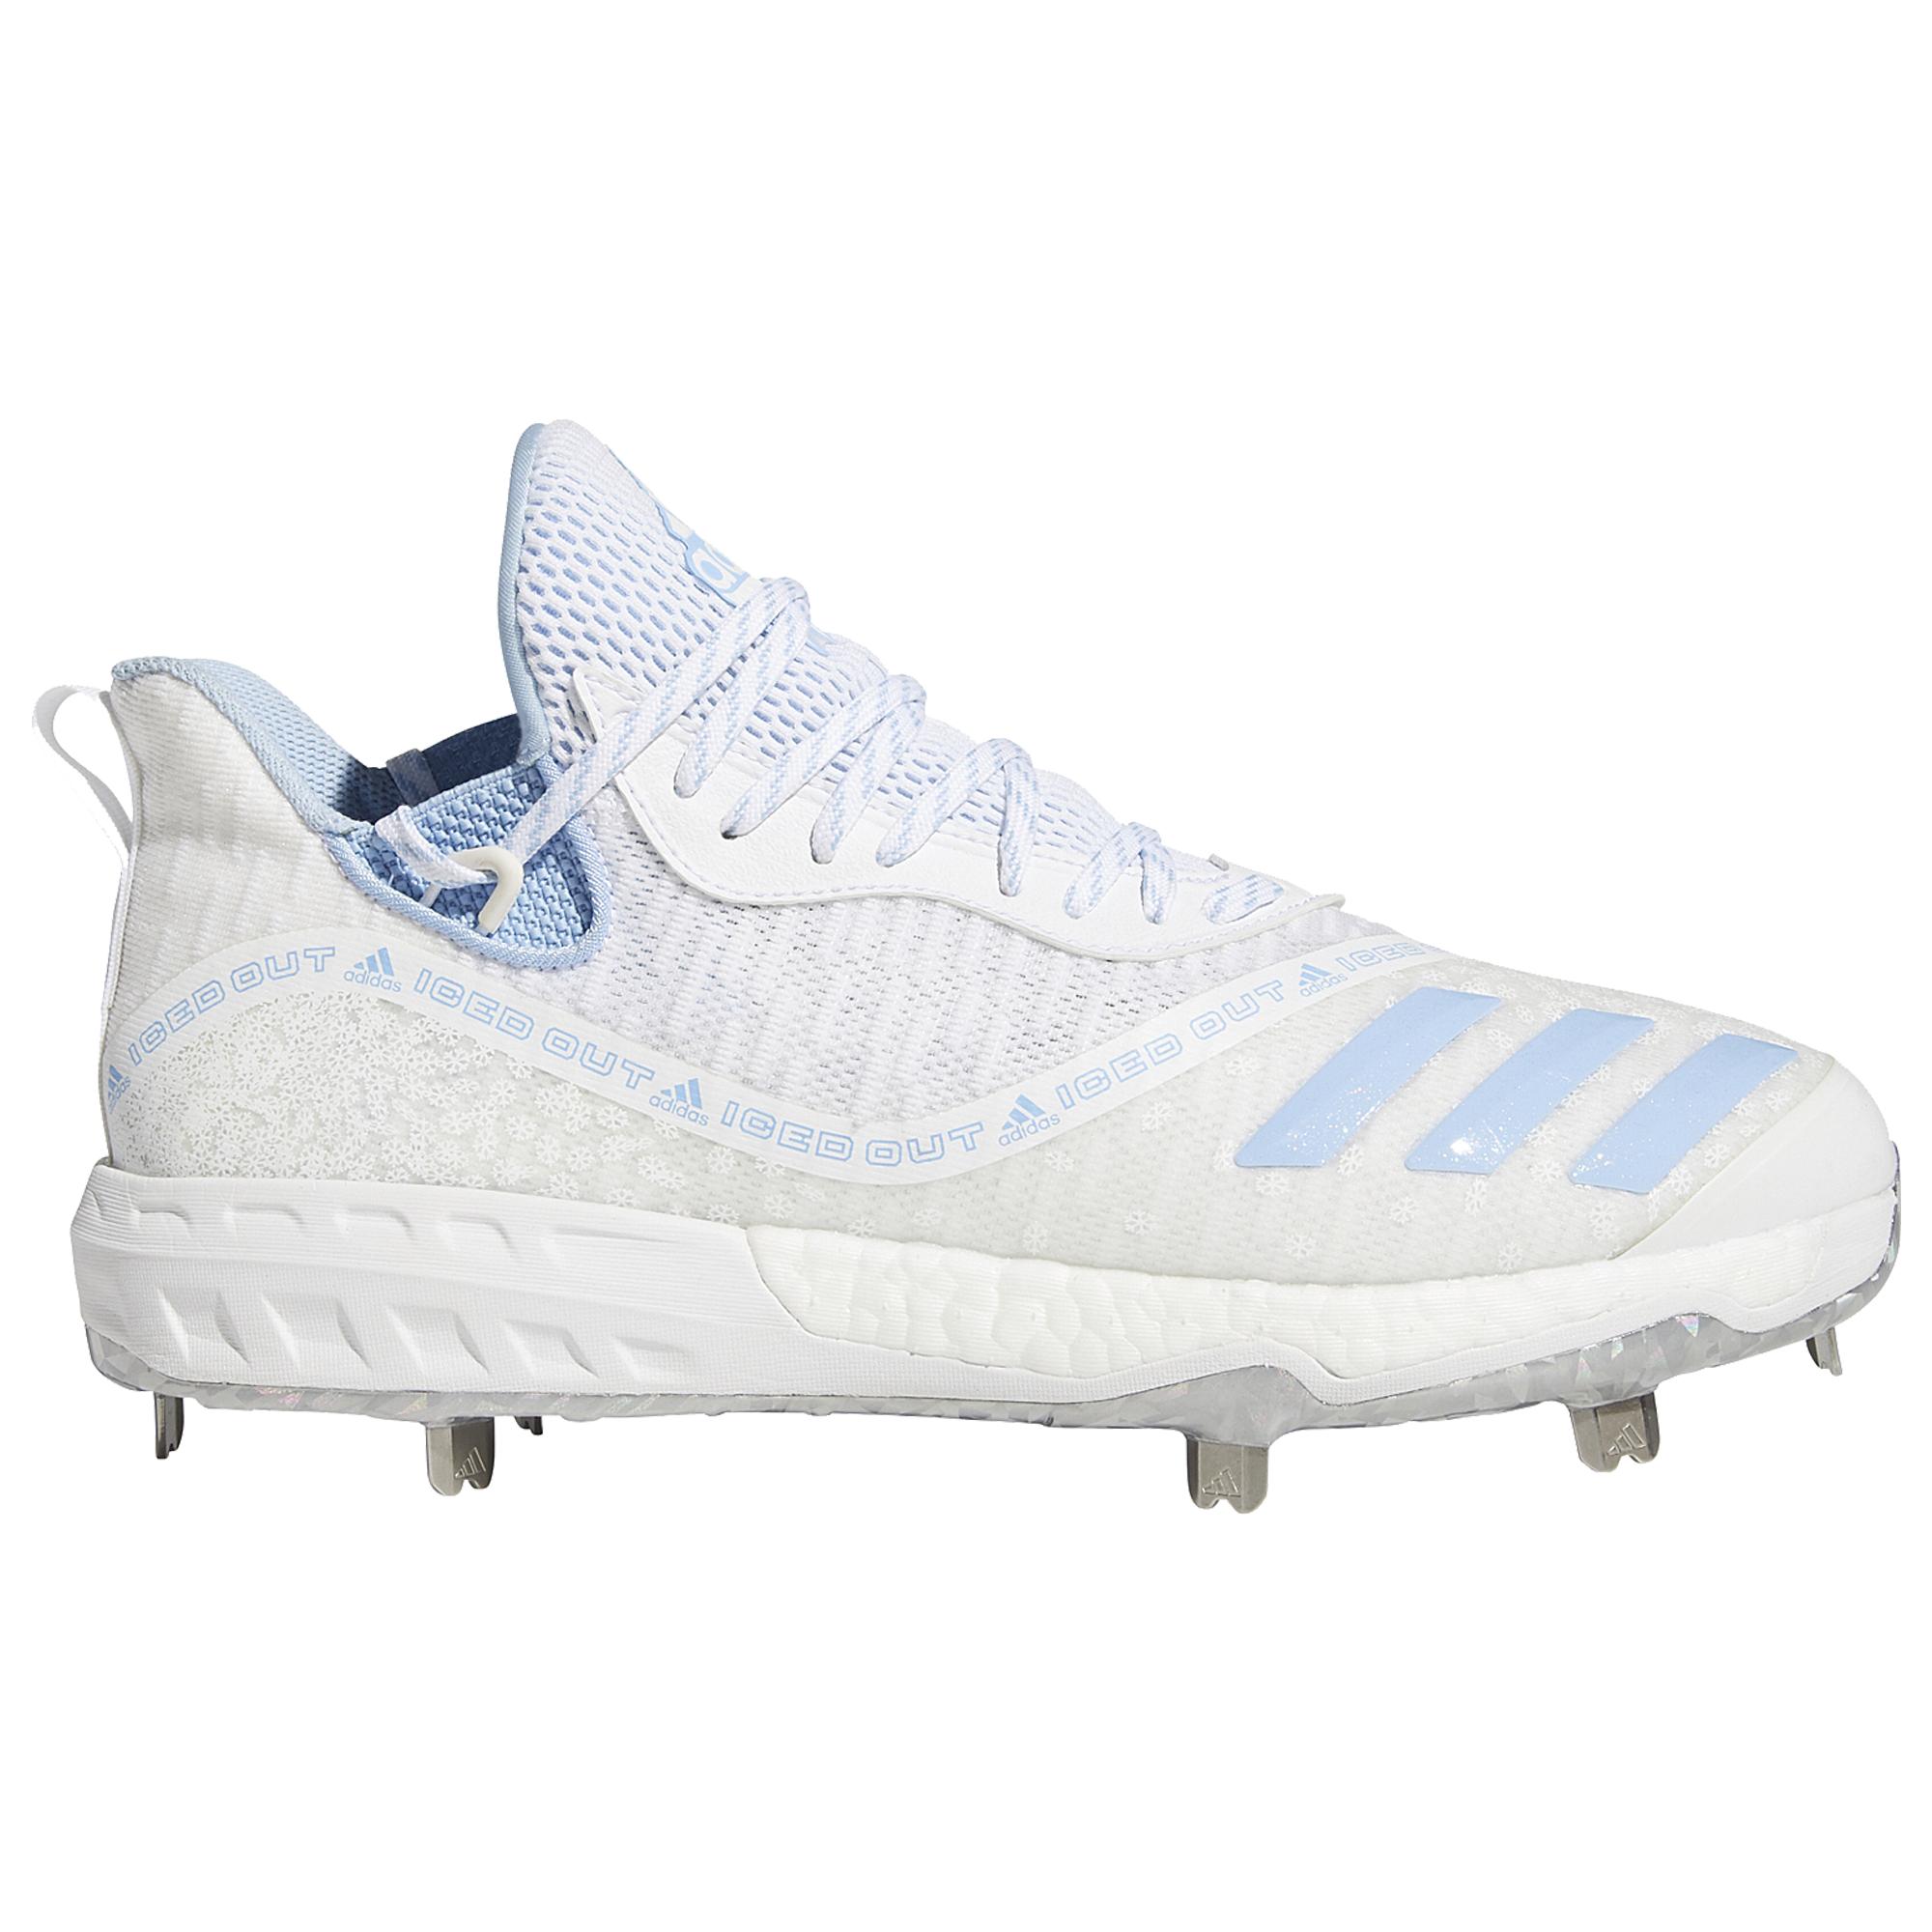 adidas energy boost icon 2.0 men's baseball cleat